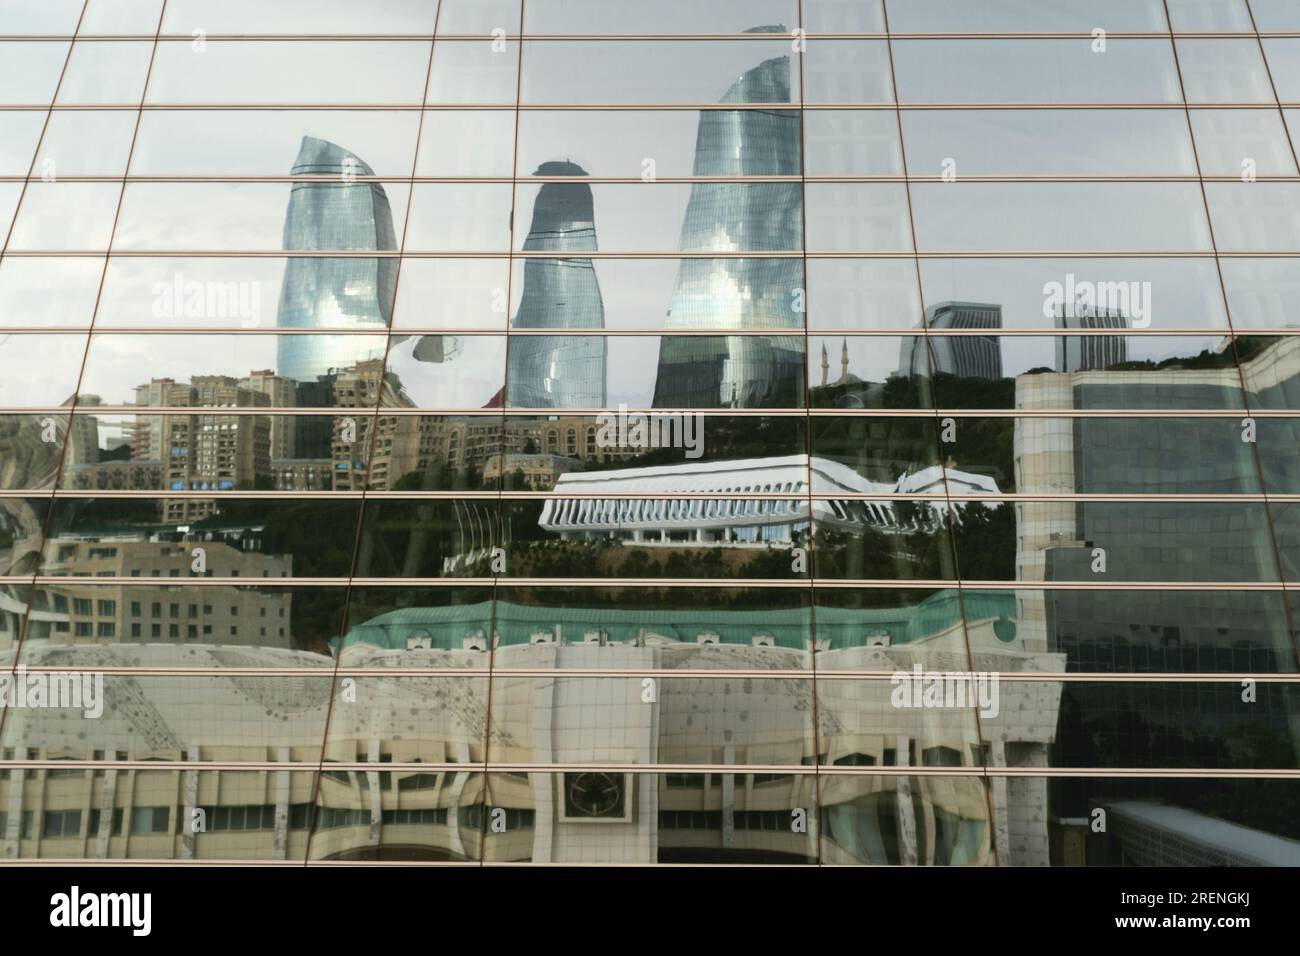 Baku, Azerbaijan - June 28, 2023: On a cloudy morning, the iconic Flame Towers cast their shimmering reflection onto the windows of a nearby shopping Stock Photo